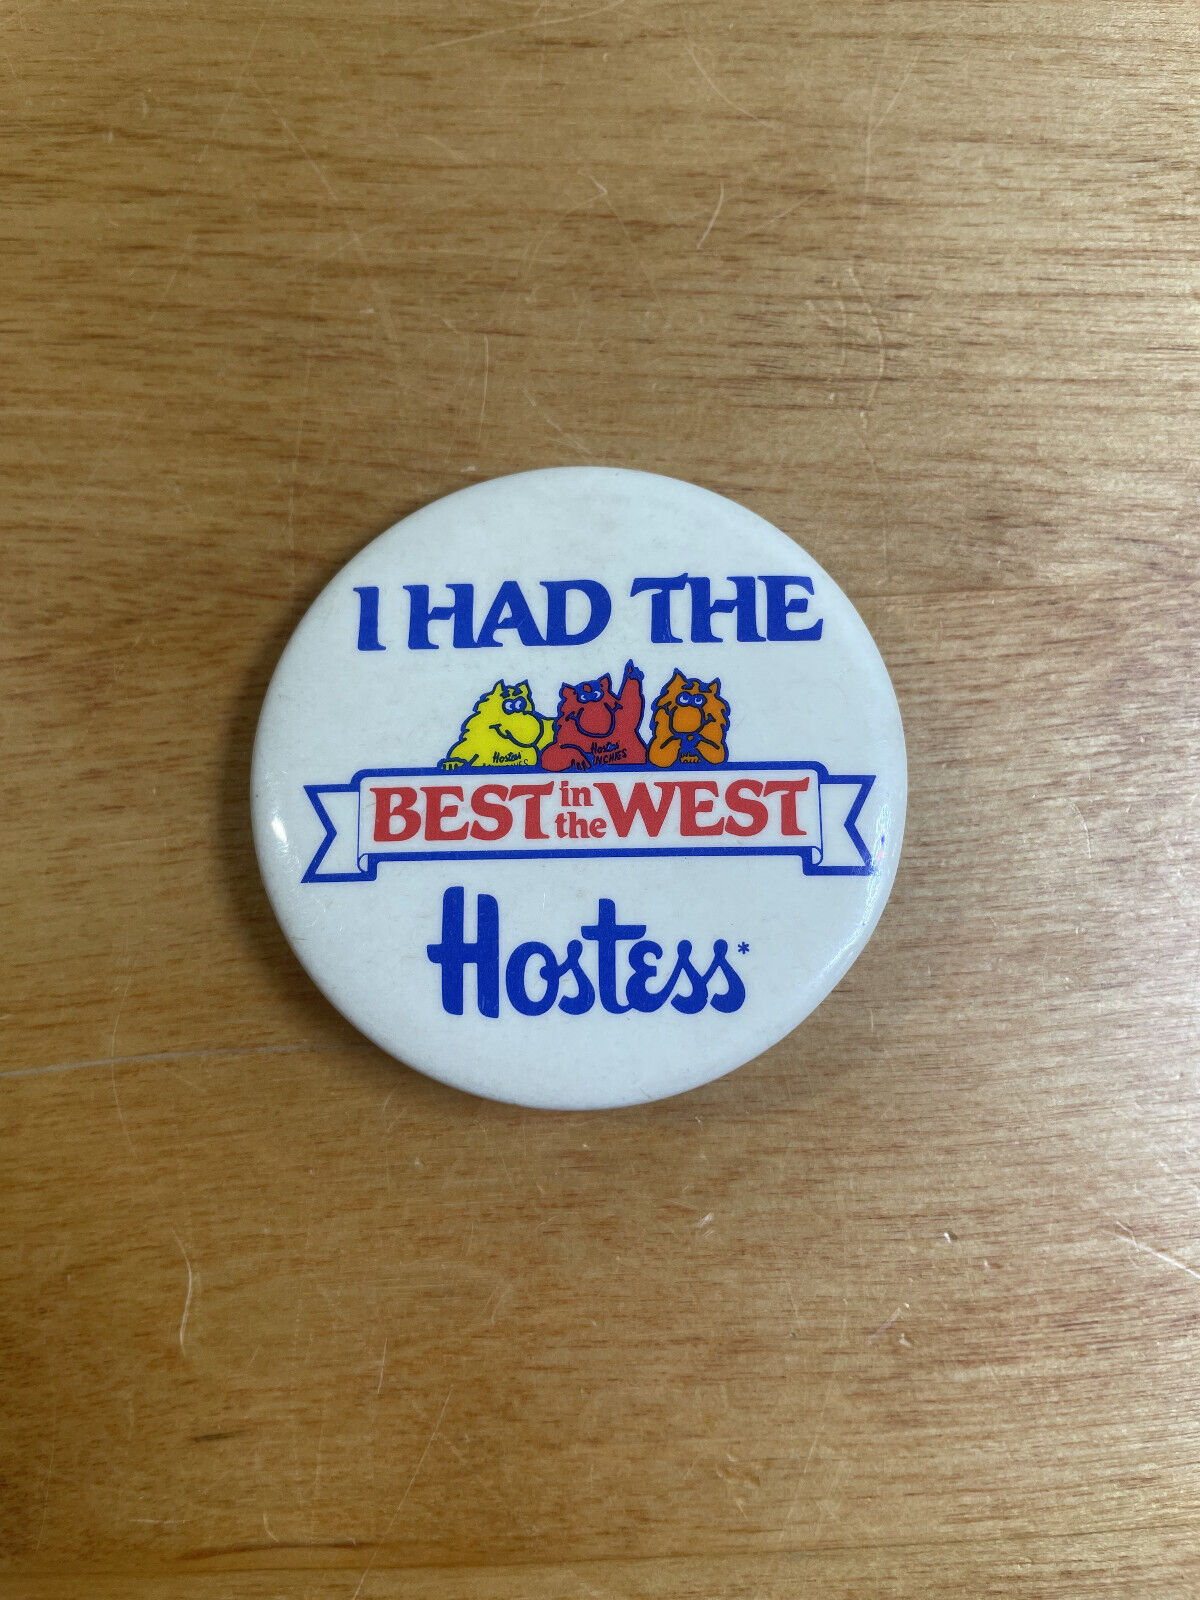 I Had The Best In The West Hostess Chips Vintage Metal Pinback Pin Button